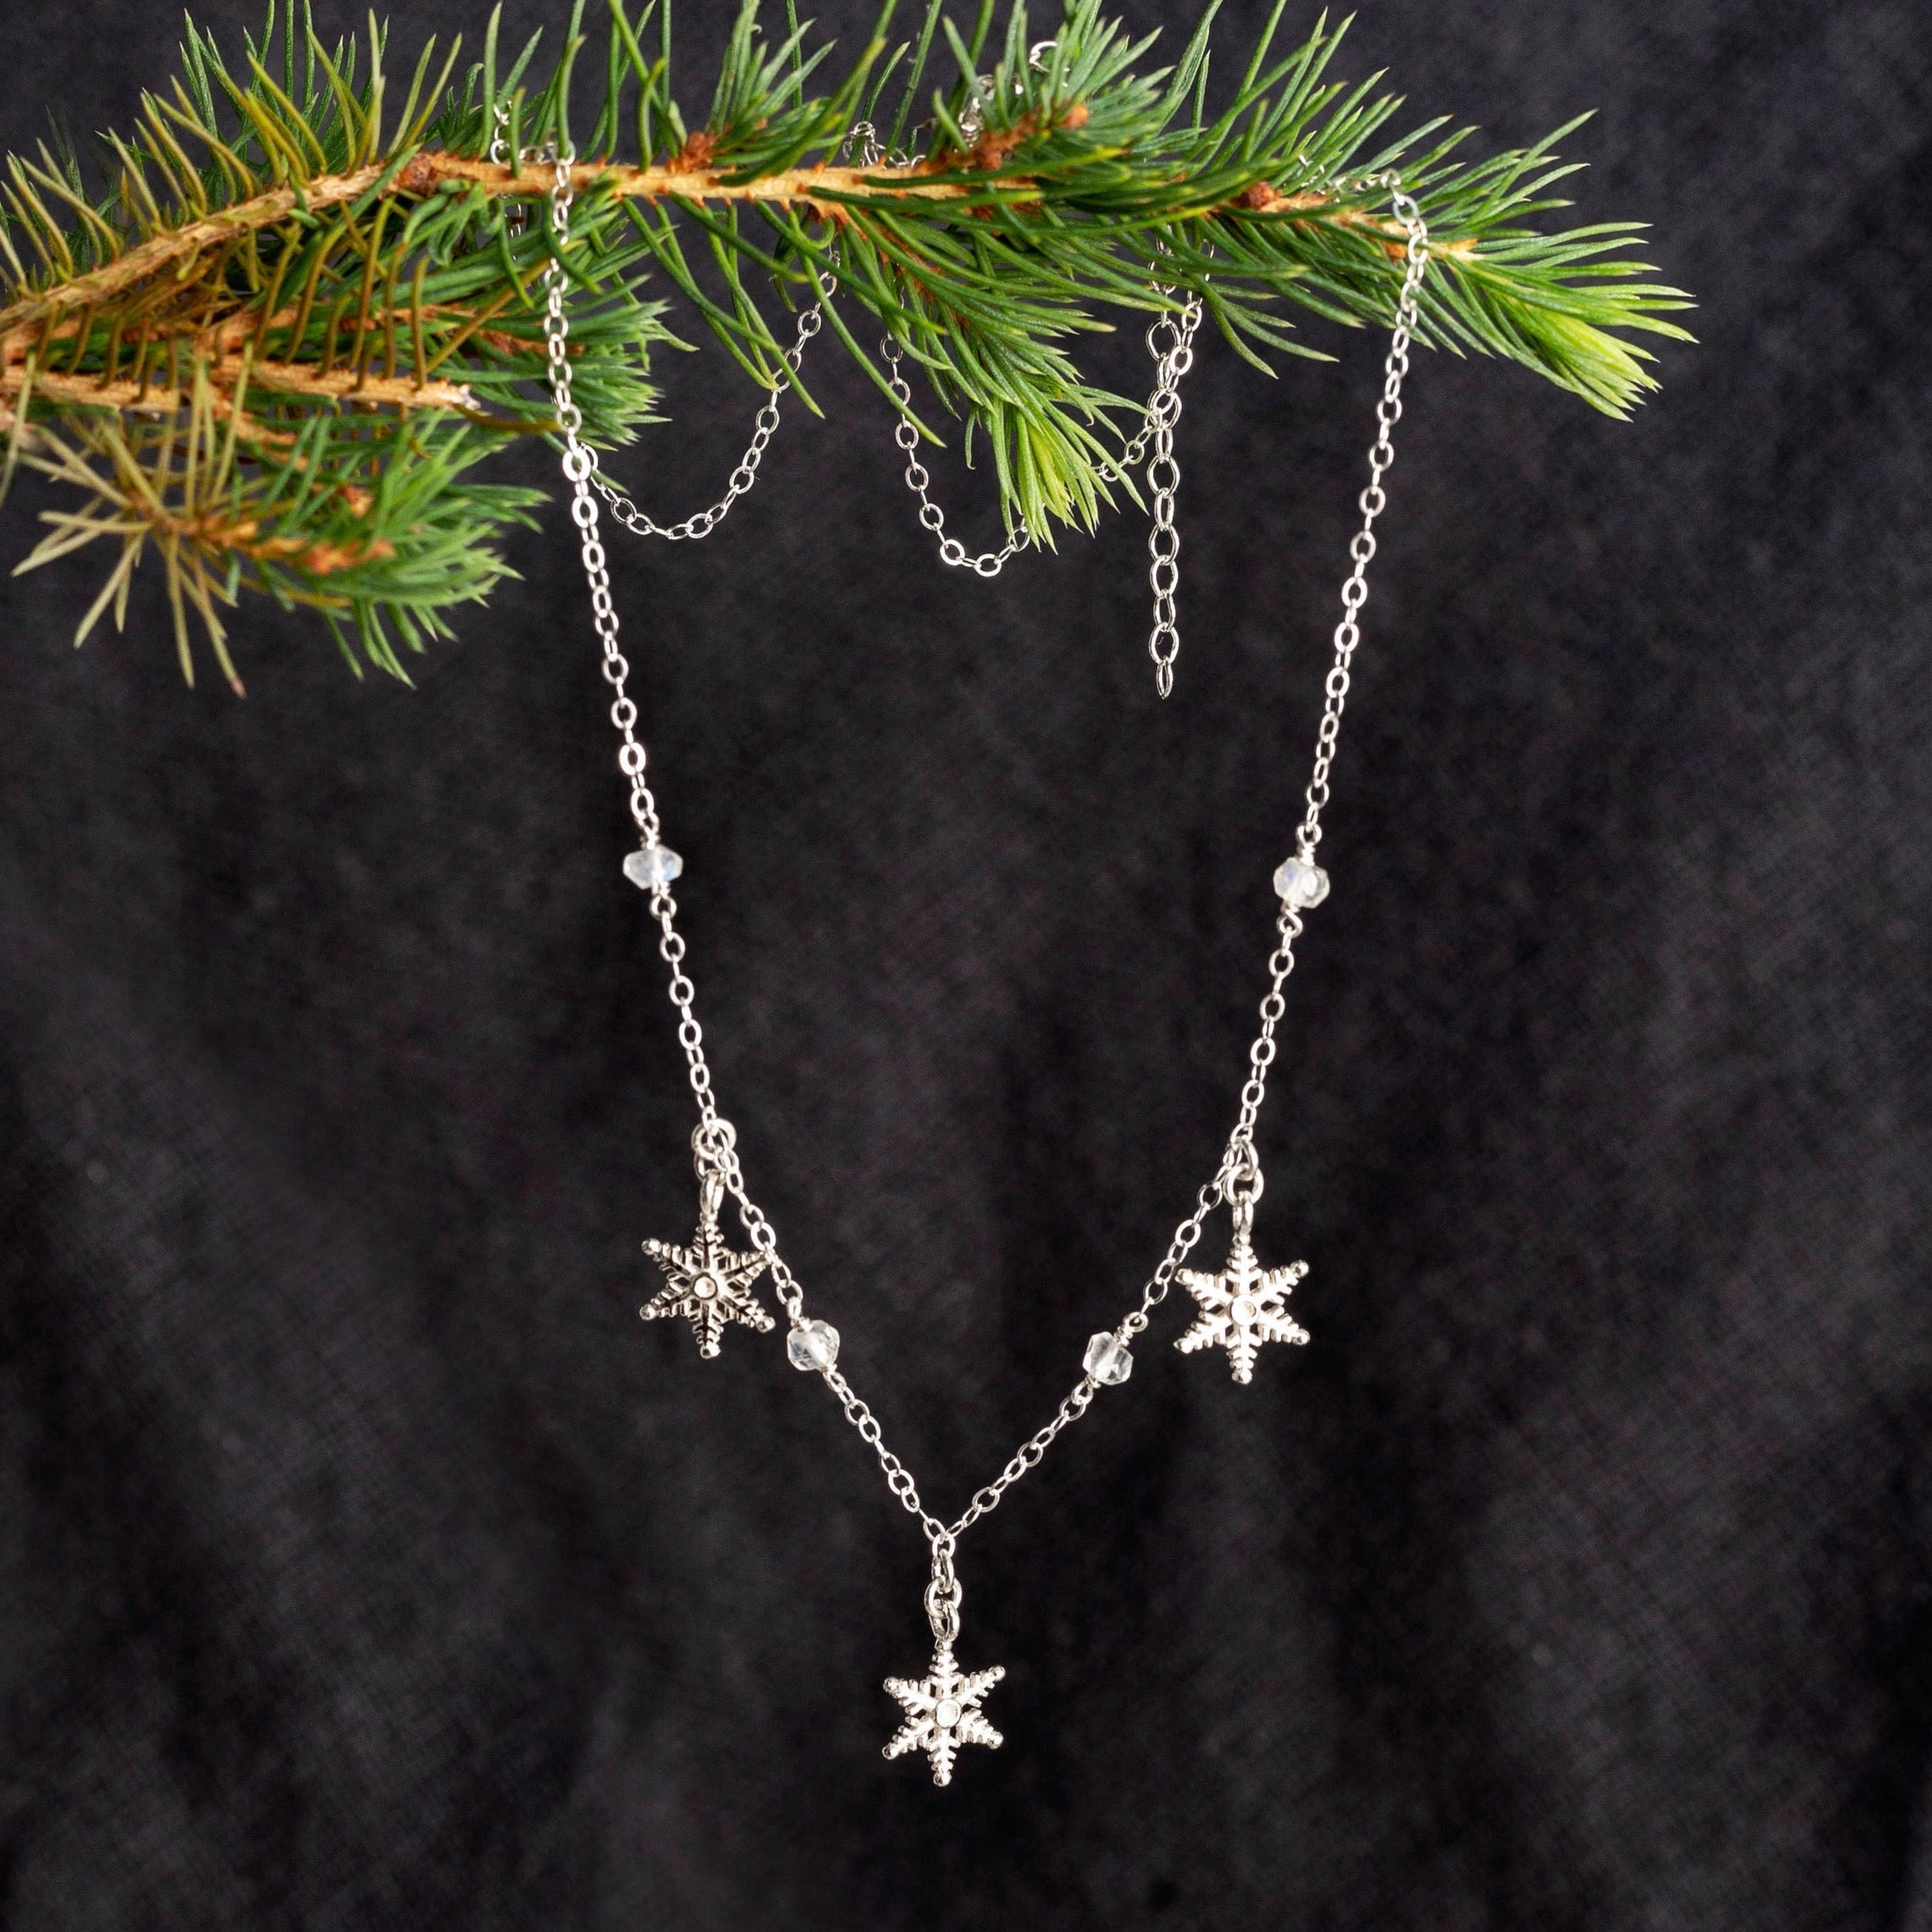 Sterling Silver Snowflake Necklace 14-32 Inch | Jewellerybox.co.uk